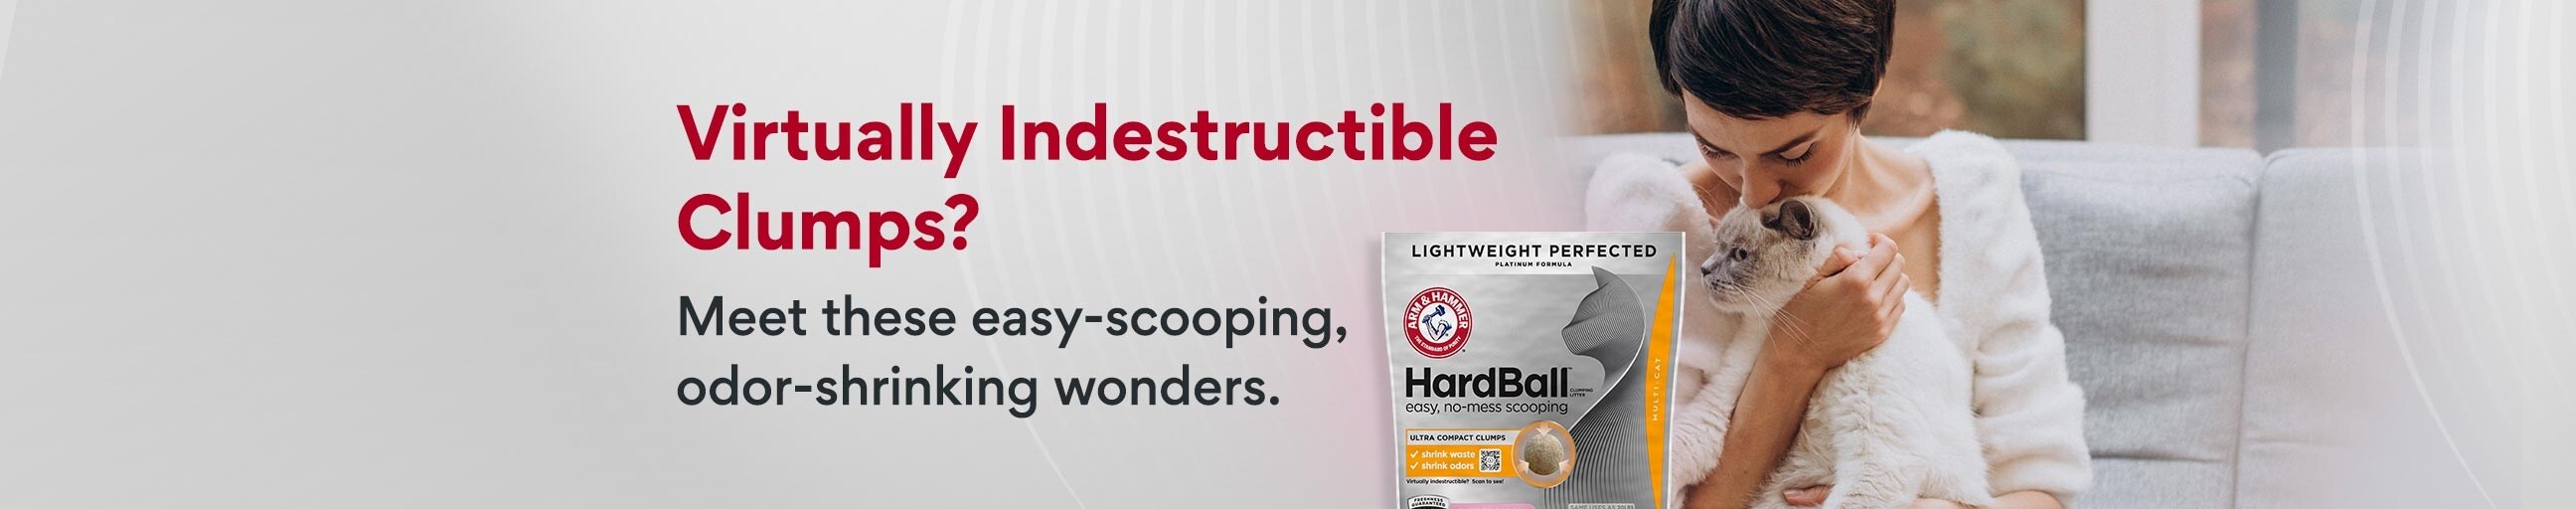 Virtually indestructible clumps? Meet these easy-scooping, odor-shrinking wonders. Shop now.